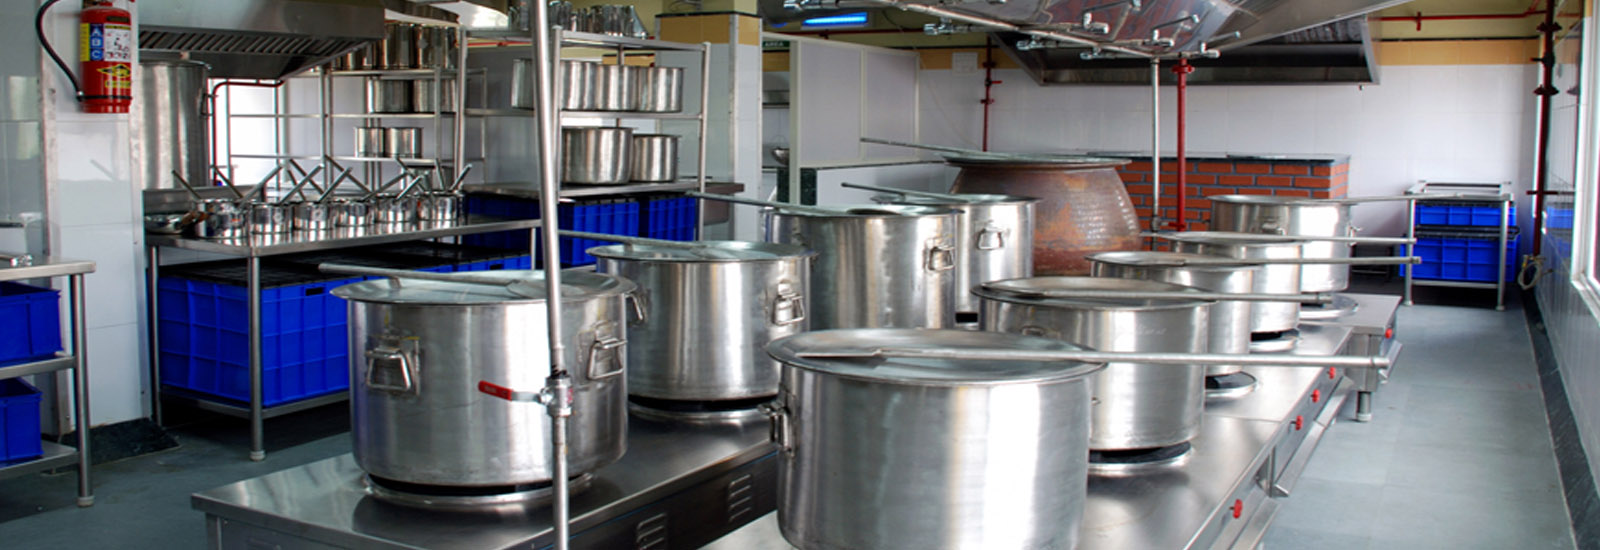 commercial kitchen equipments manufacturer in Bangalore